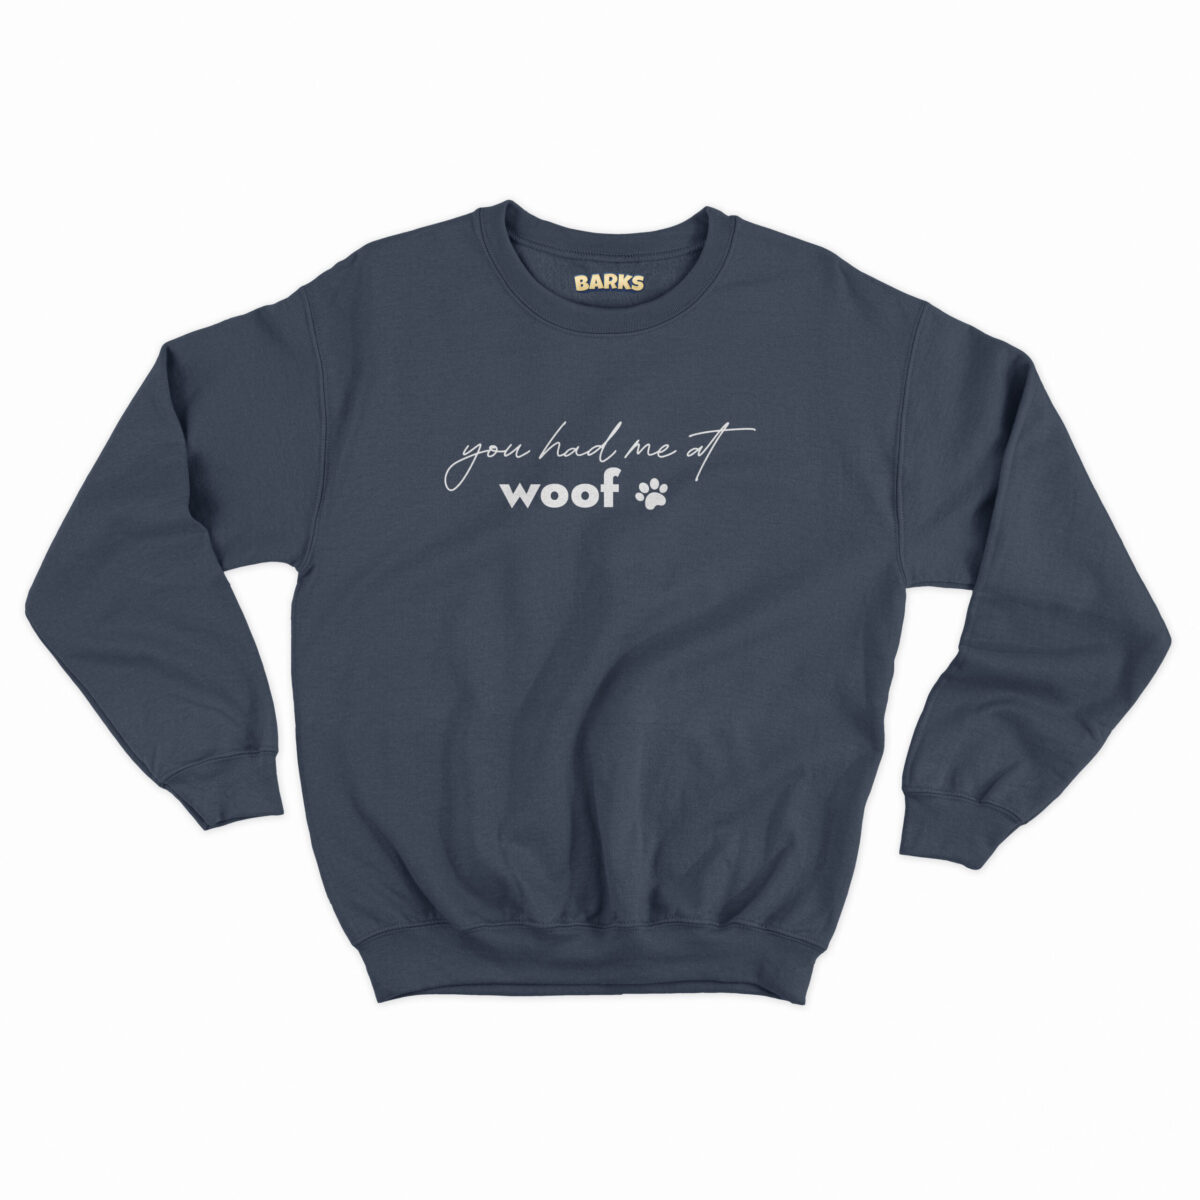 barks sweater you had me at woof french navy scaled